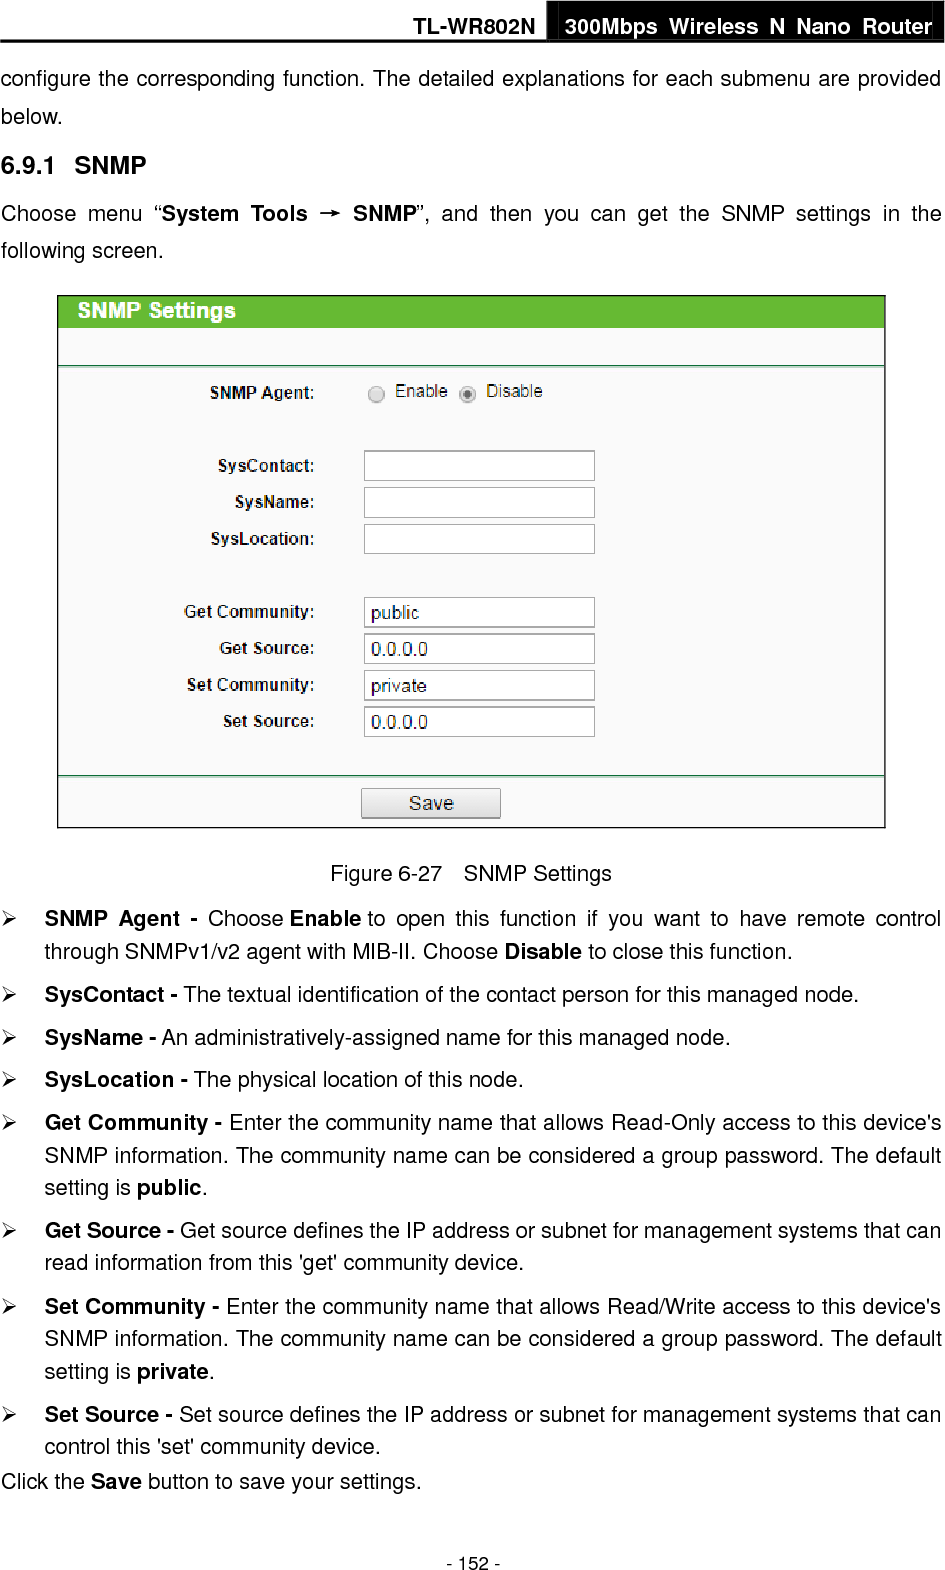 TL-WR802N 300Mbps  Wireless  N  Nano  Router  - 152 - configure the corresponding function. The detailed explanations for each submenu are provided below. 6.9.1  SNMP Choose  menu  “System  Tools  →  SNMP”,  and  then  you  can  get  the  SNMP  settings  in  the following screen.  Figure 6-27    SNMP Settings  SNMP  Agent  -  Choose Enable to  open  this  function  if  you  want  to  have  remote  control through SNMPv1/v2 agent with MIB-II. Choose Disable to close this function.  SysContact - The textual identification of the contact person for this managed node.  SysName - An administratively-assigned name for this managed node.  SysLocation - The physical location of this node.  Get Community - Enter the community name that allows Read-Only access to this device&apos;s SNMP information. The community name can be considered a group password. The default setting is public.  Get Source - Get source defines the IP address or subnet for management systems that can read information from this &apos;get&apos; community device.  Set Community - Enter the community name that allows Read/Write access to this device&apos;s SNMP information. The community name can be considered a group password. The default setting is private.  Set Source - Set source defines the IP address or subnet for management systems that can control this &apos;set&apos; community device. Click the Save button to save your settings. 